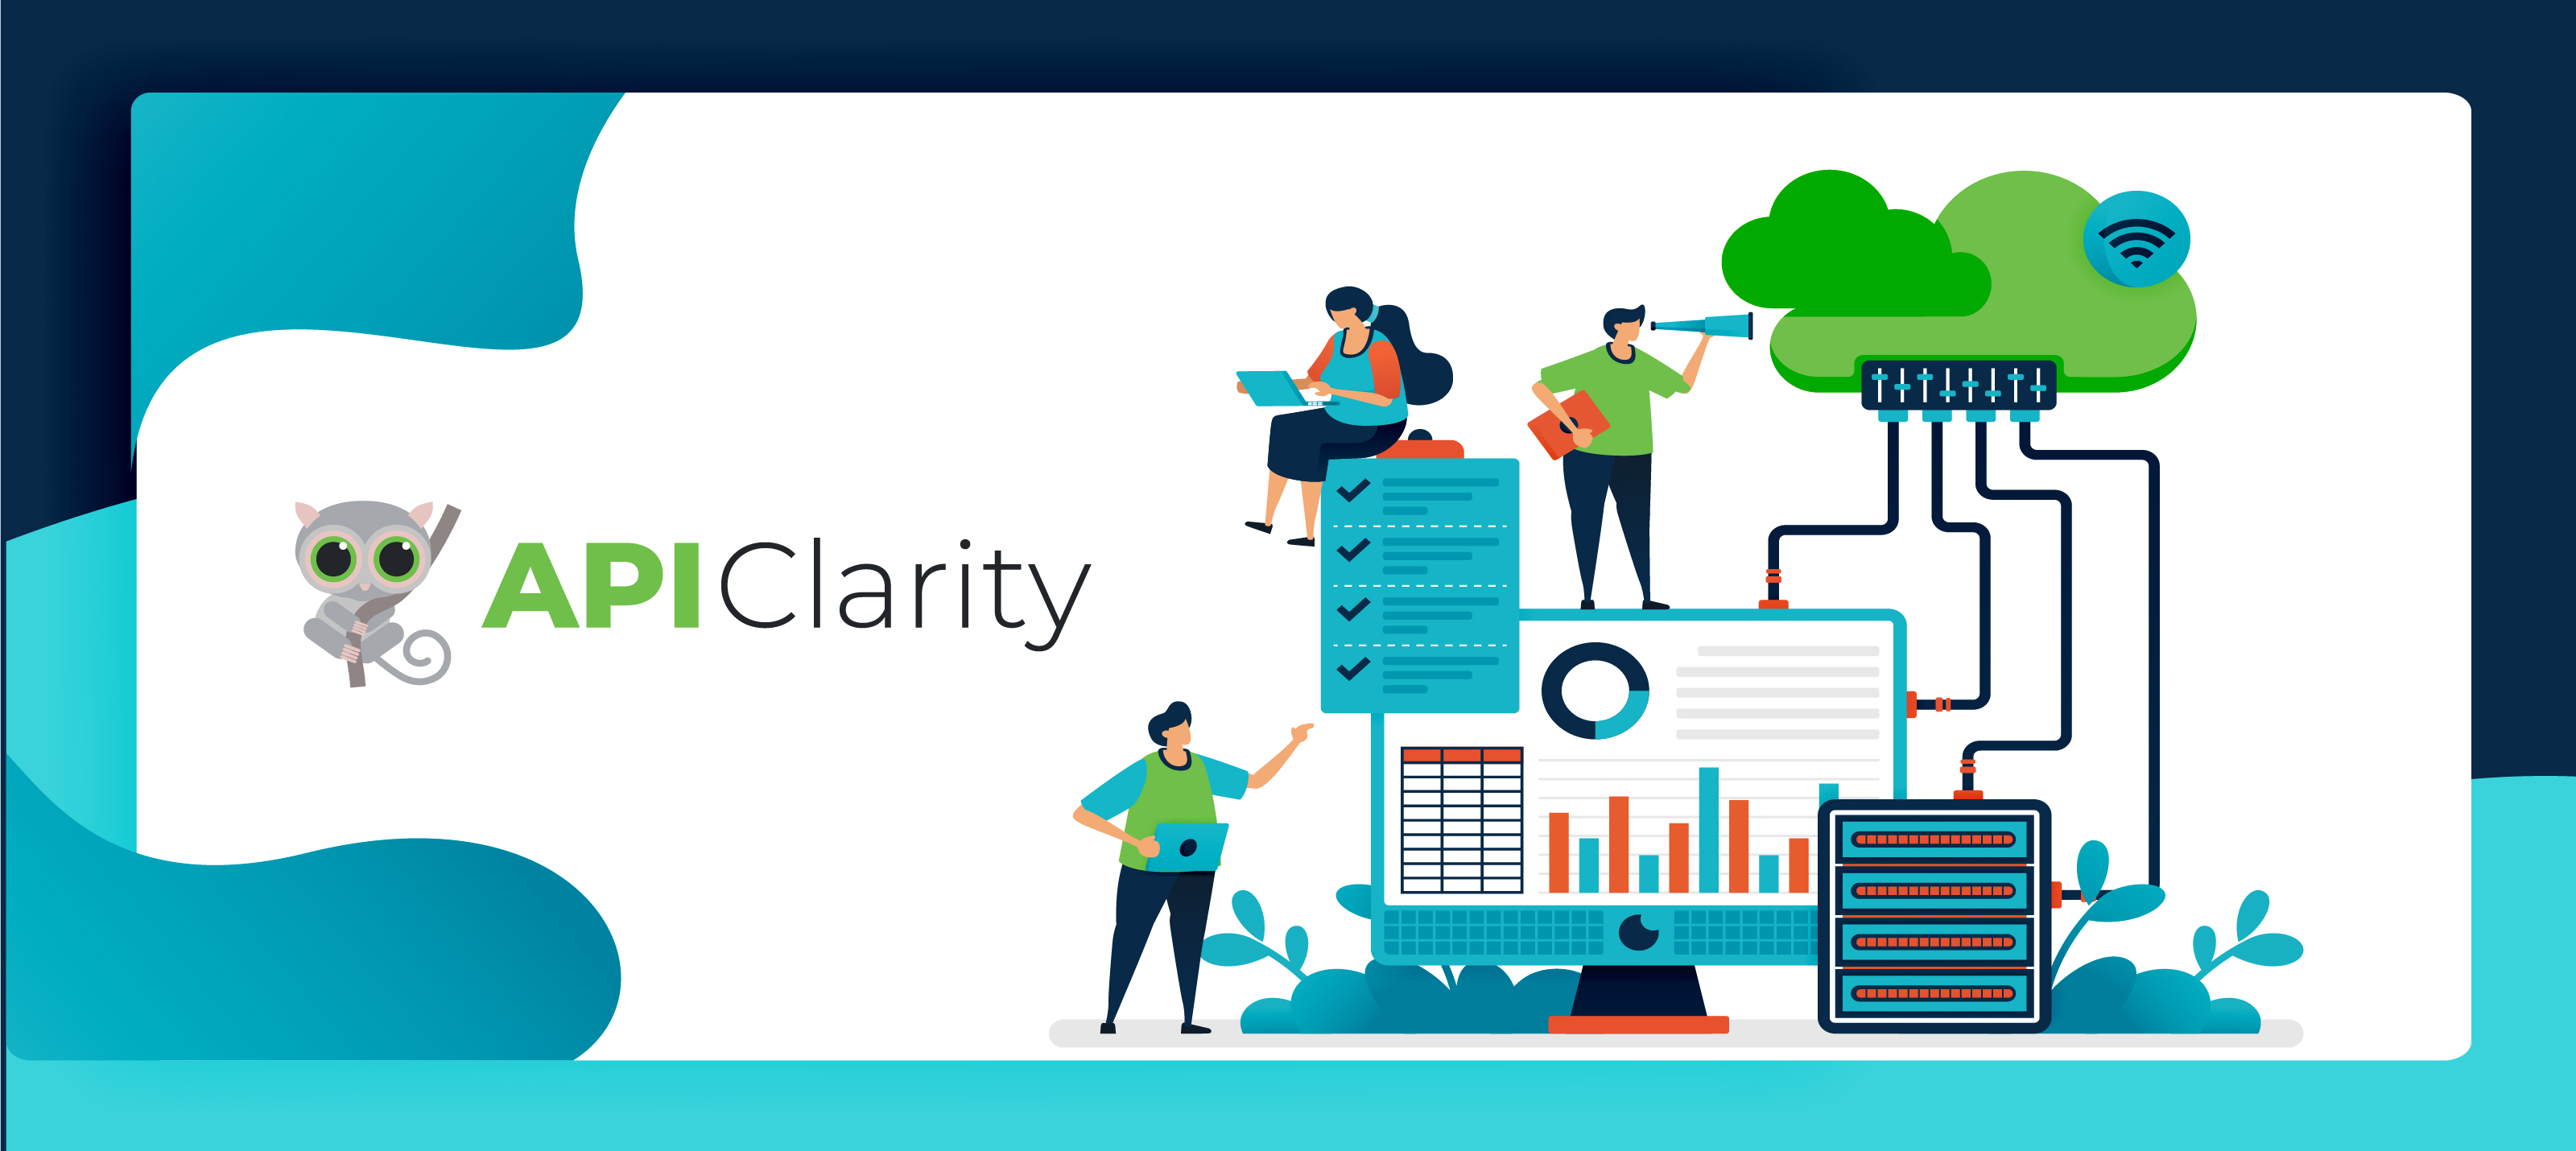 APIClarity, a New Open Source Solution to Ensure API Visibility & Enhance API Security